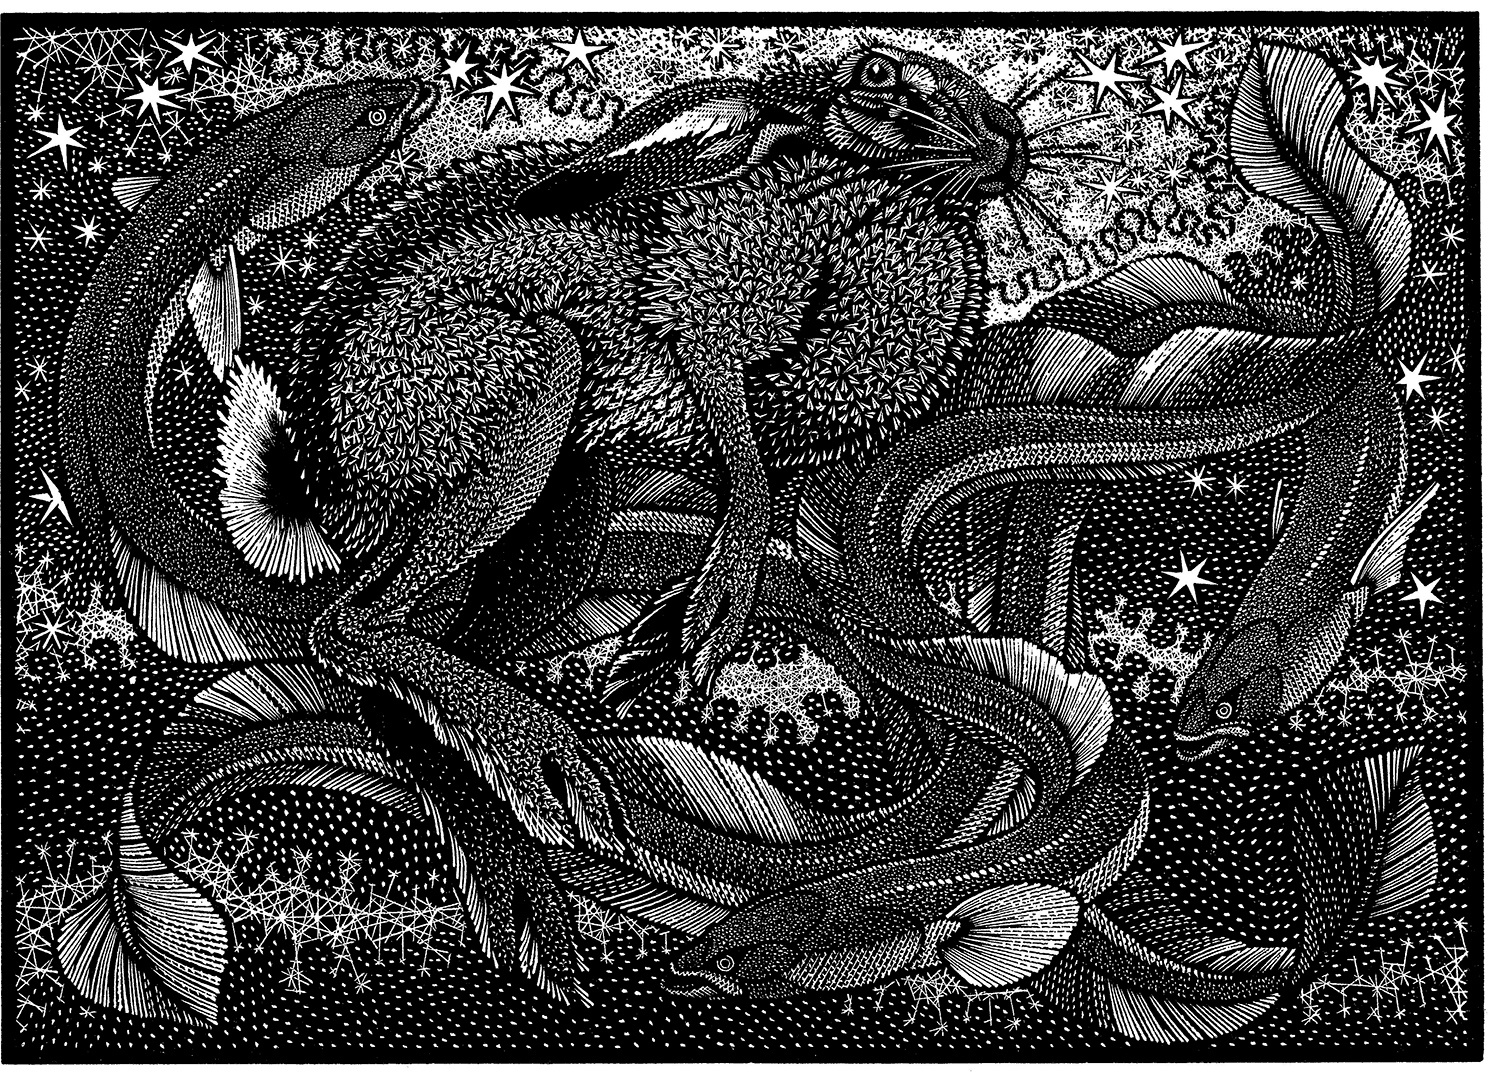 Nocturnal Encounters-Hare and Eels by Colin See-Paynton